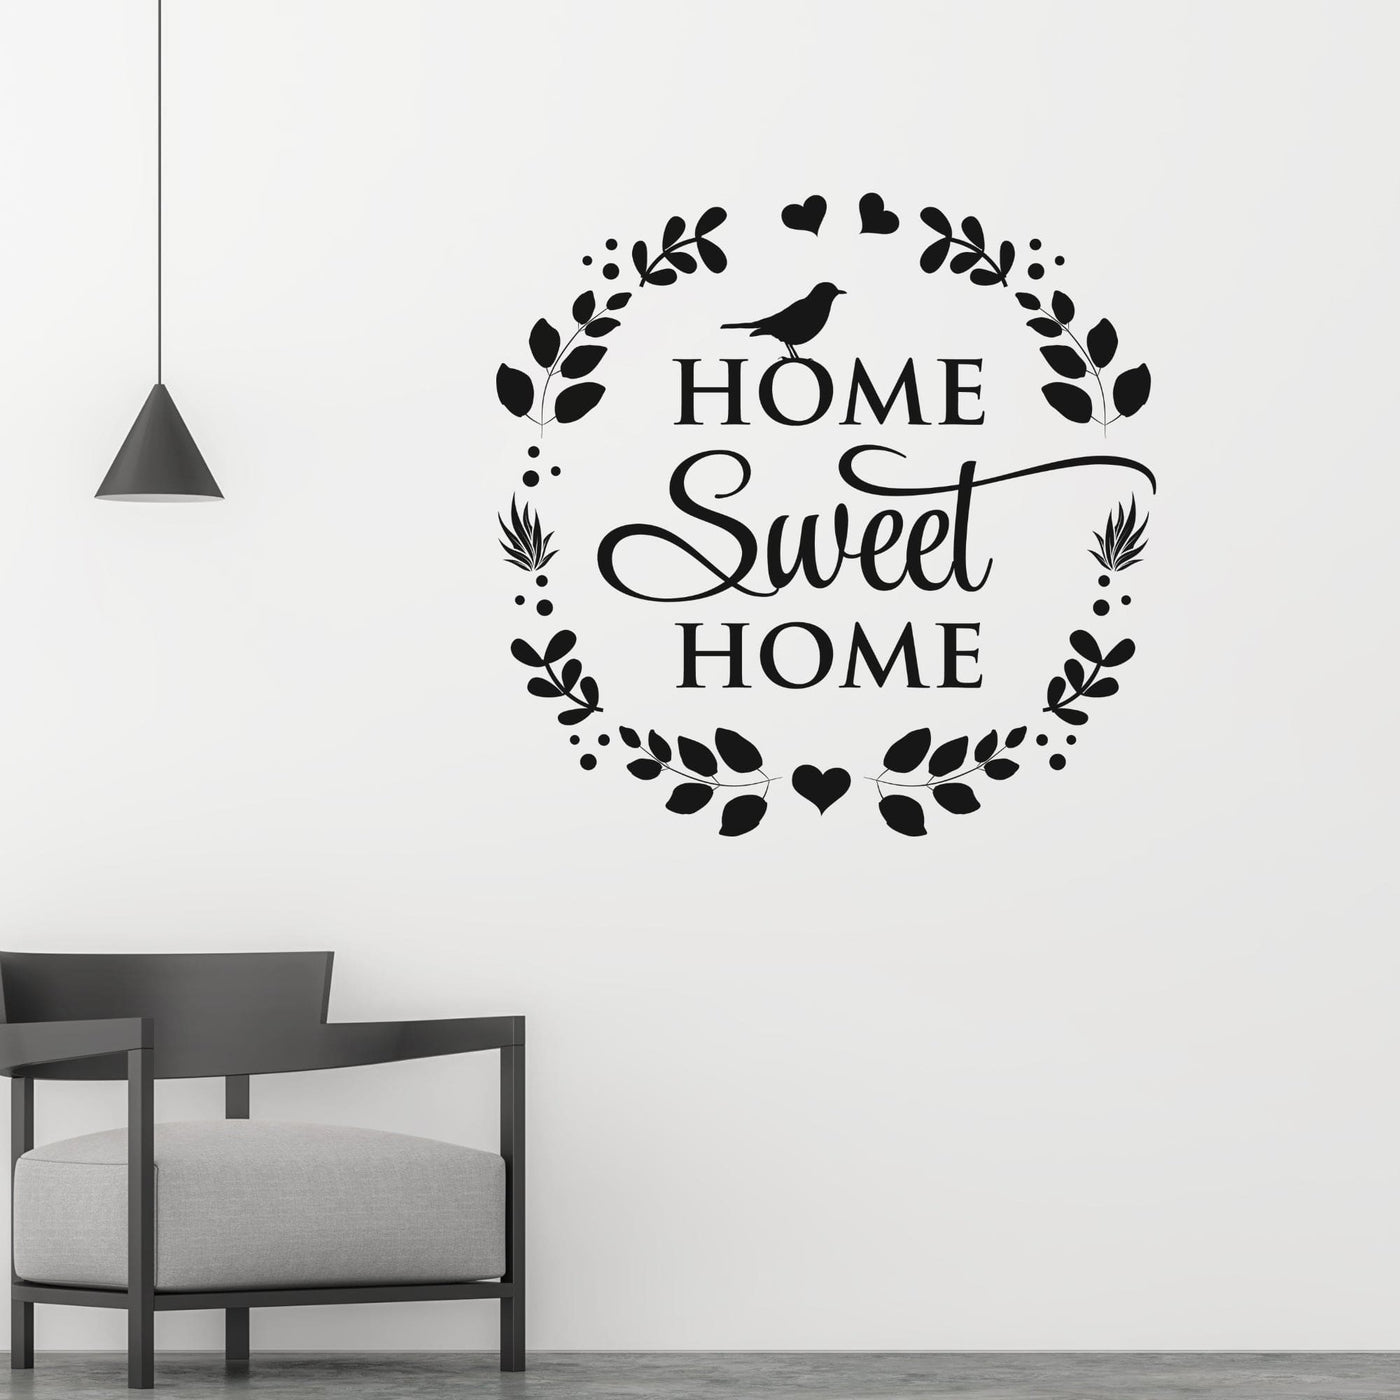 Decor - Home Sweet Home Removable Vinyl Wall Decal Easy Peel And Stick Wall Art